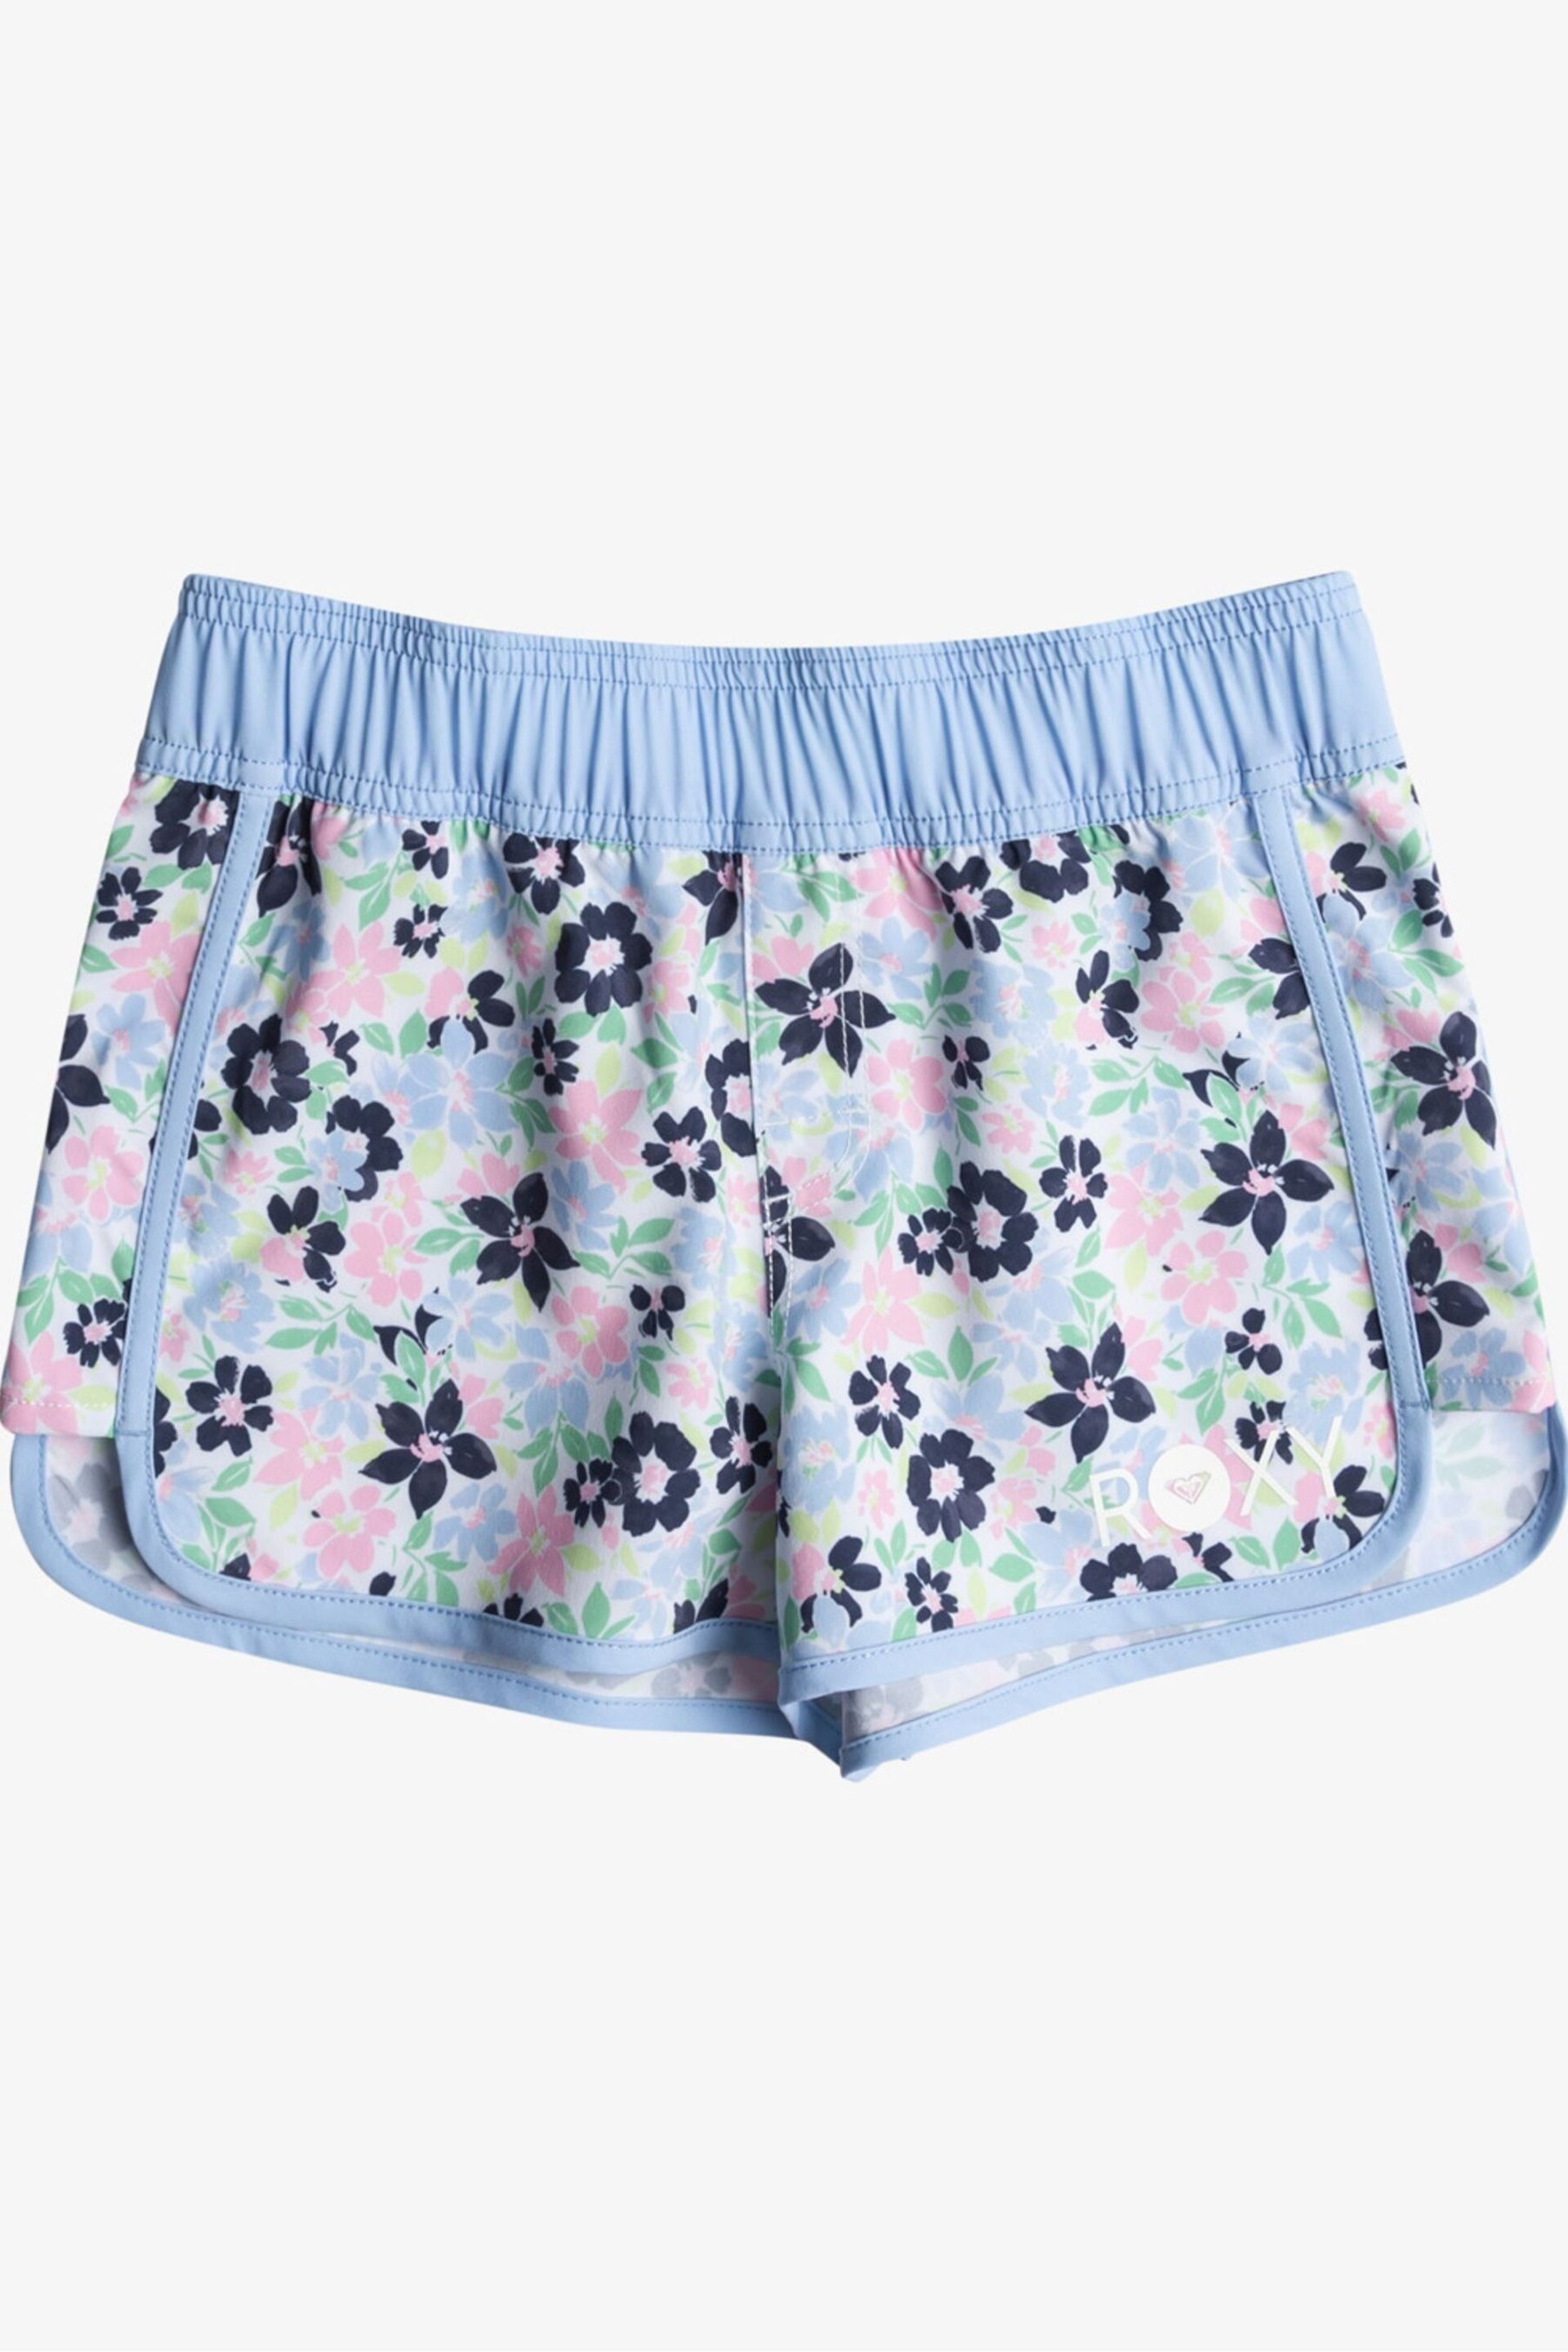 Roxy Blue Floral Printed Board Shorts - Image 1 of 2